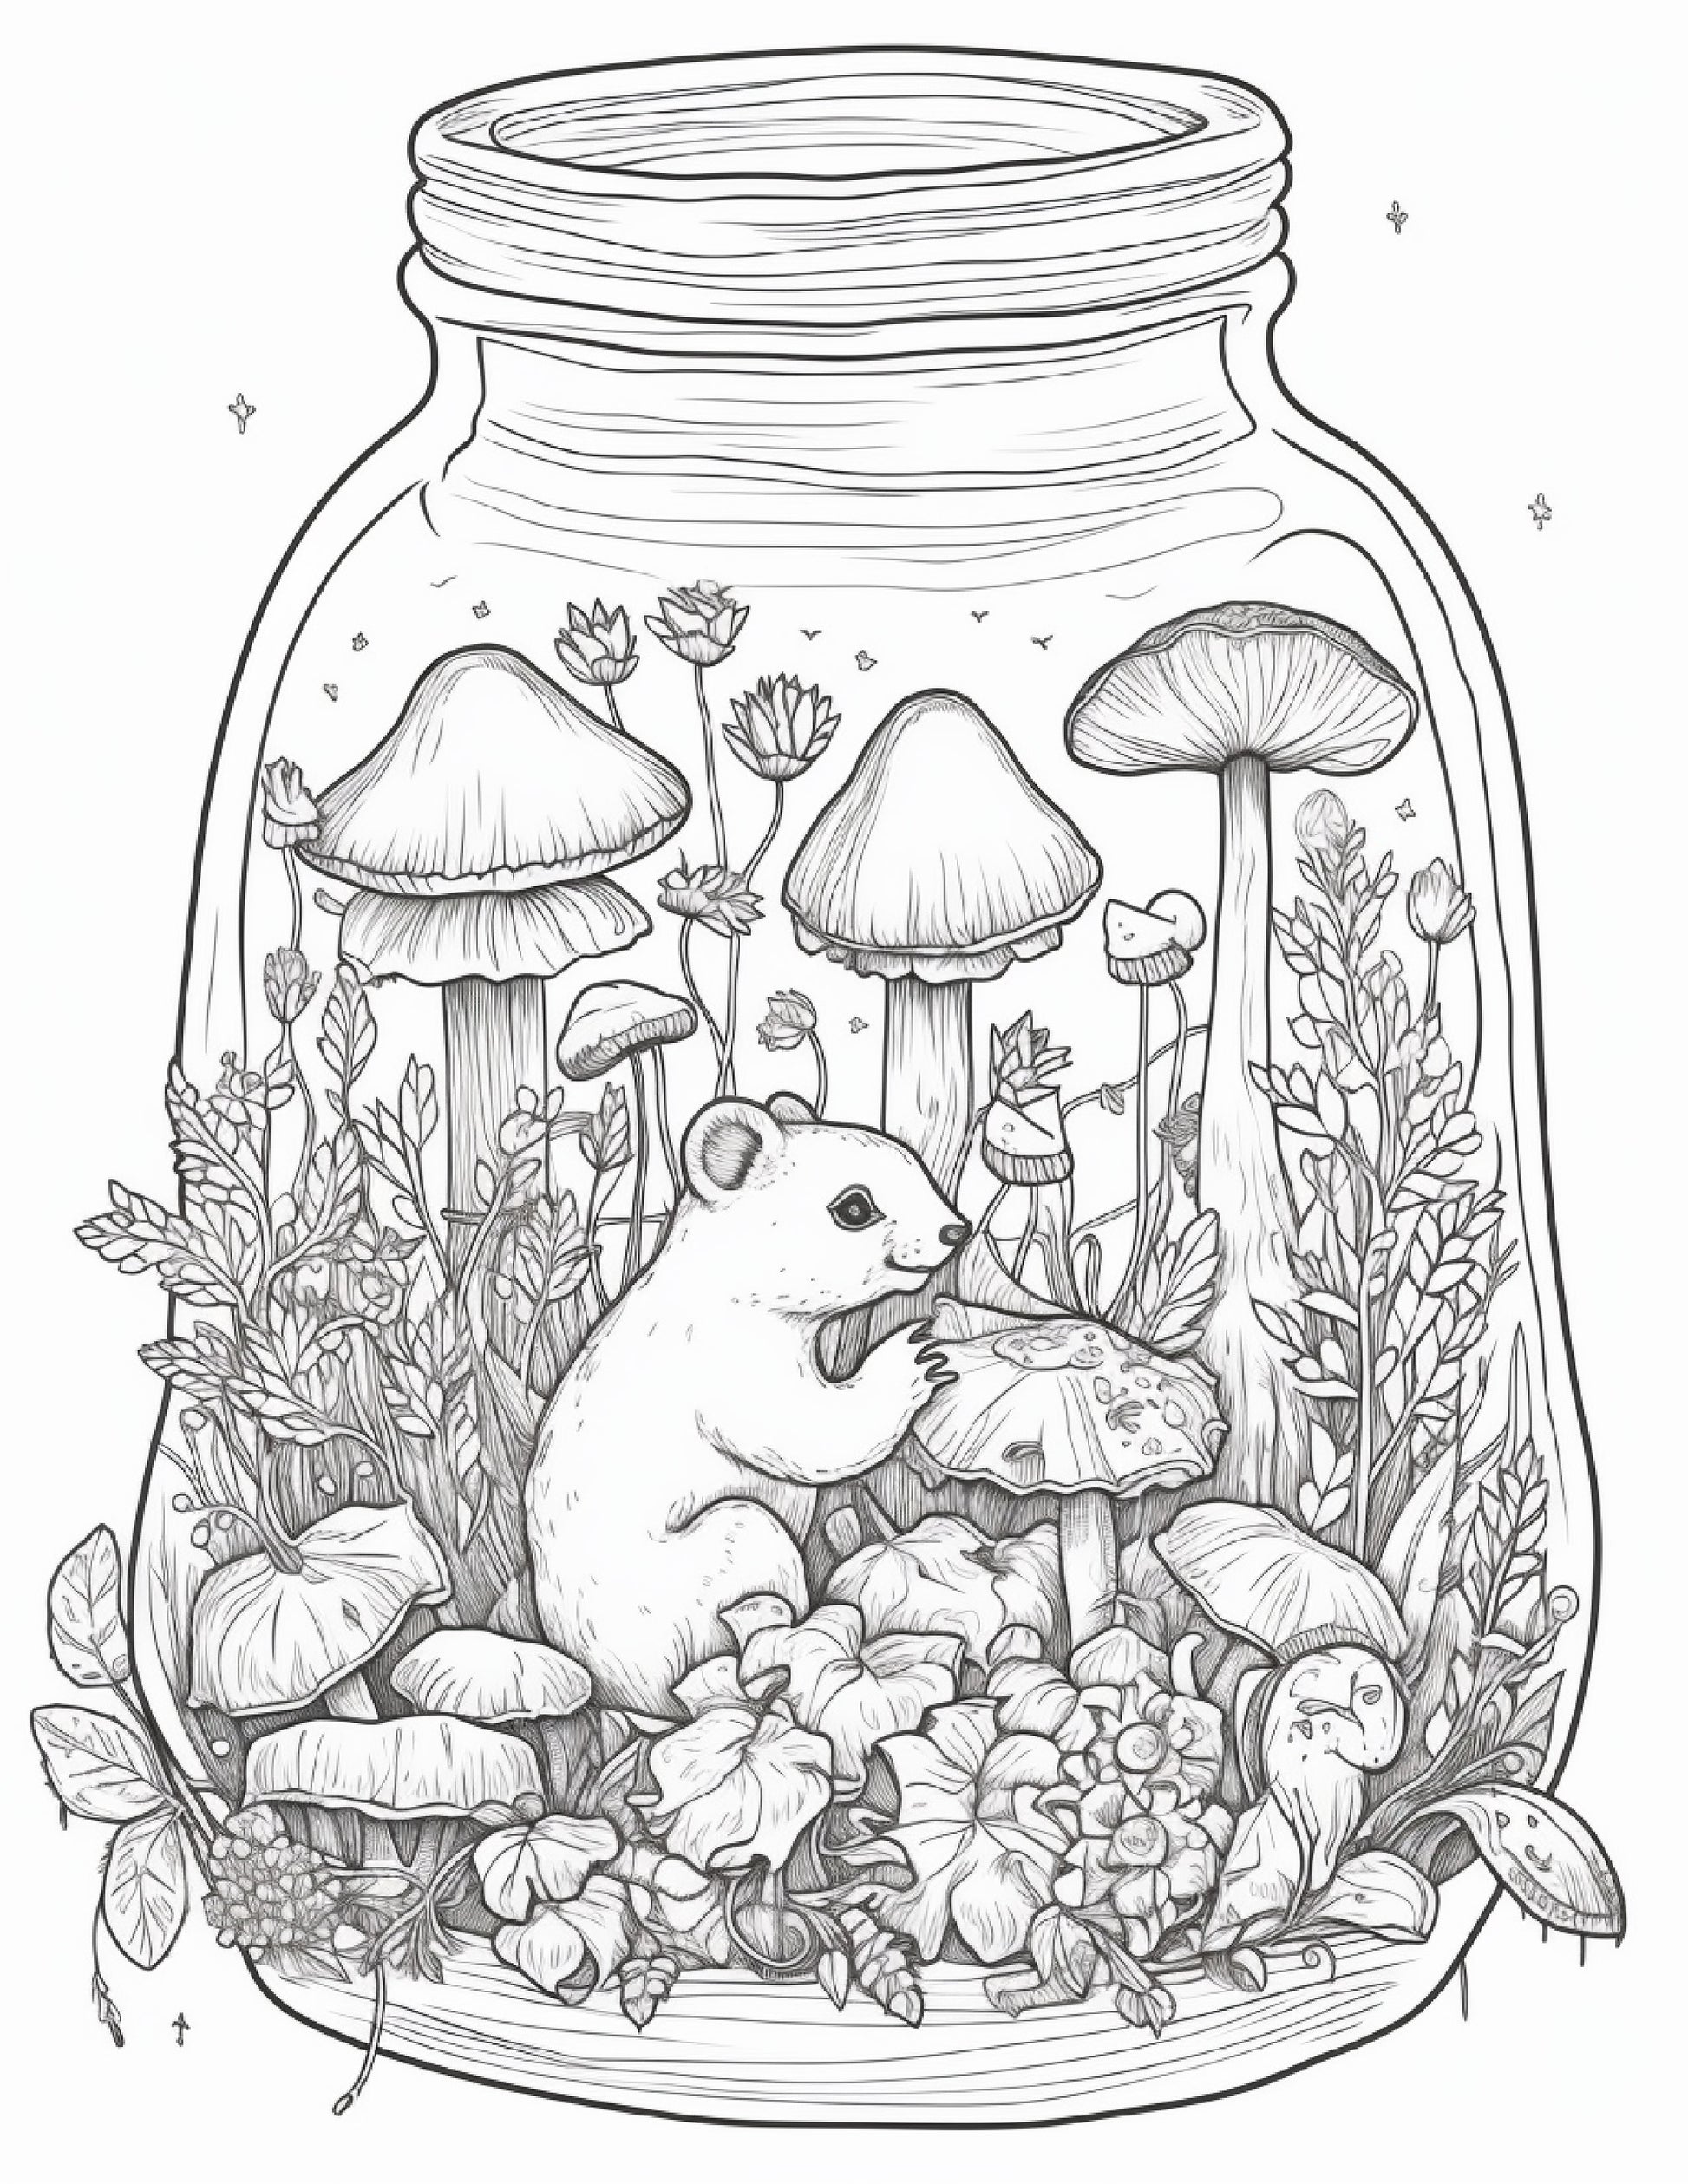 50 Printable Fairy Houses in Jar Coloring Pages for Adults, Grayscale